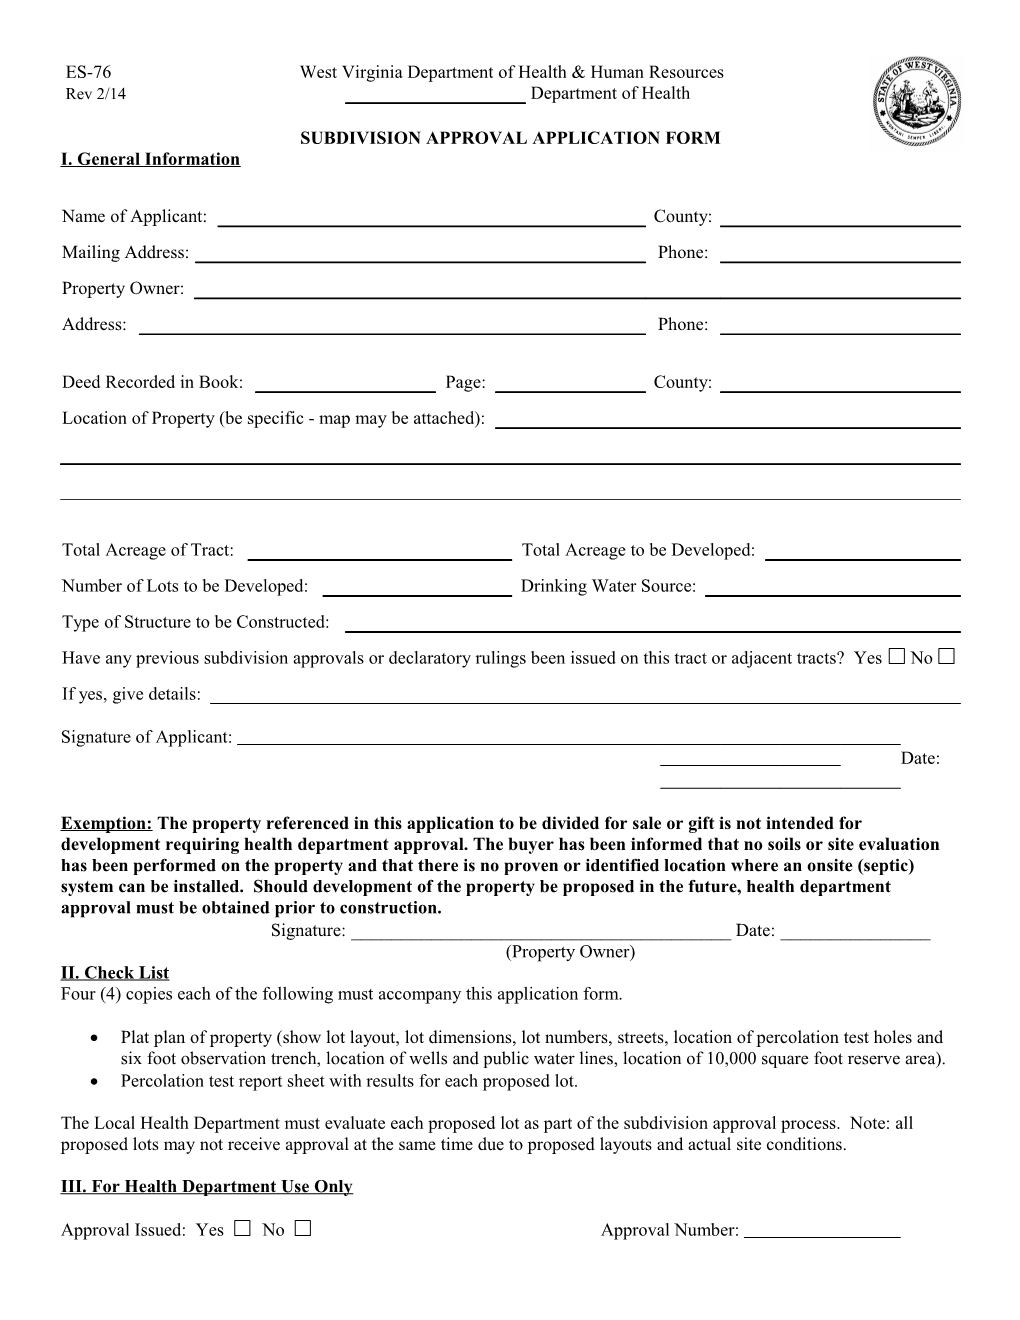 ES-76 Subdivision Approval Application Form